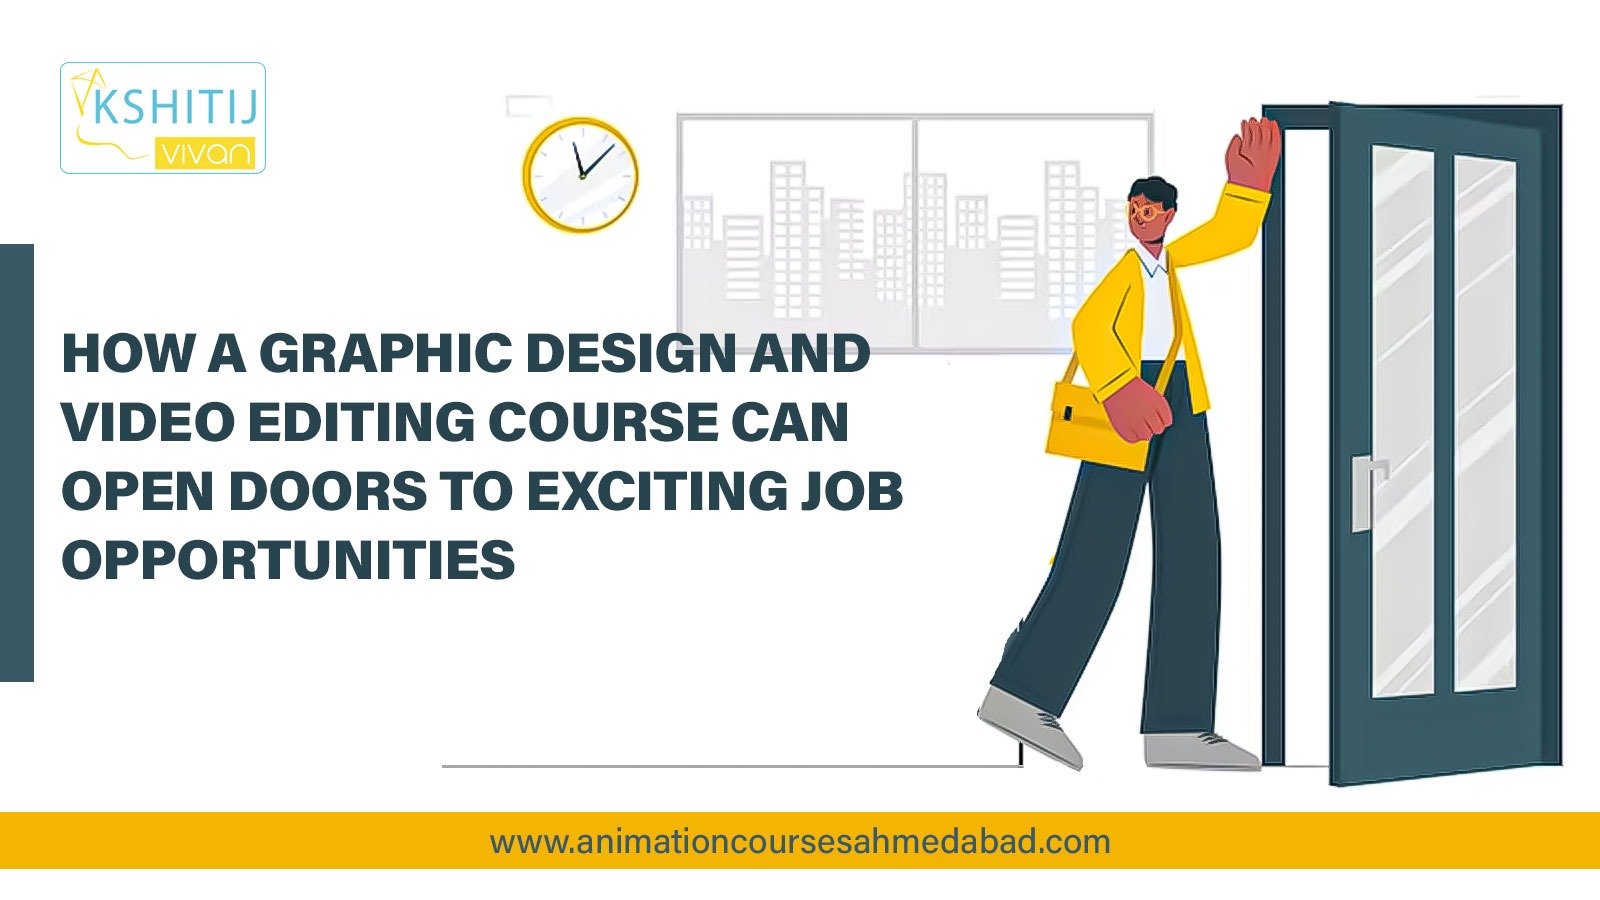 How a Graphic Design and Video Editing Course Can Open Doors to Exciting Job Opportunities